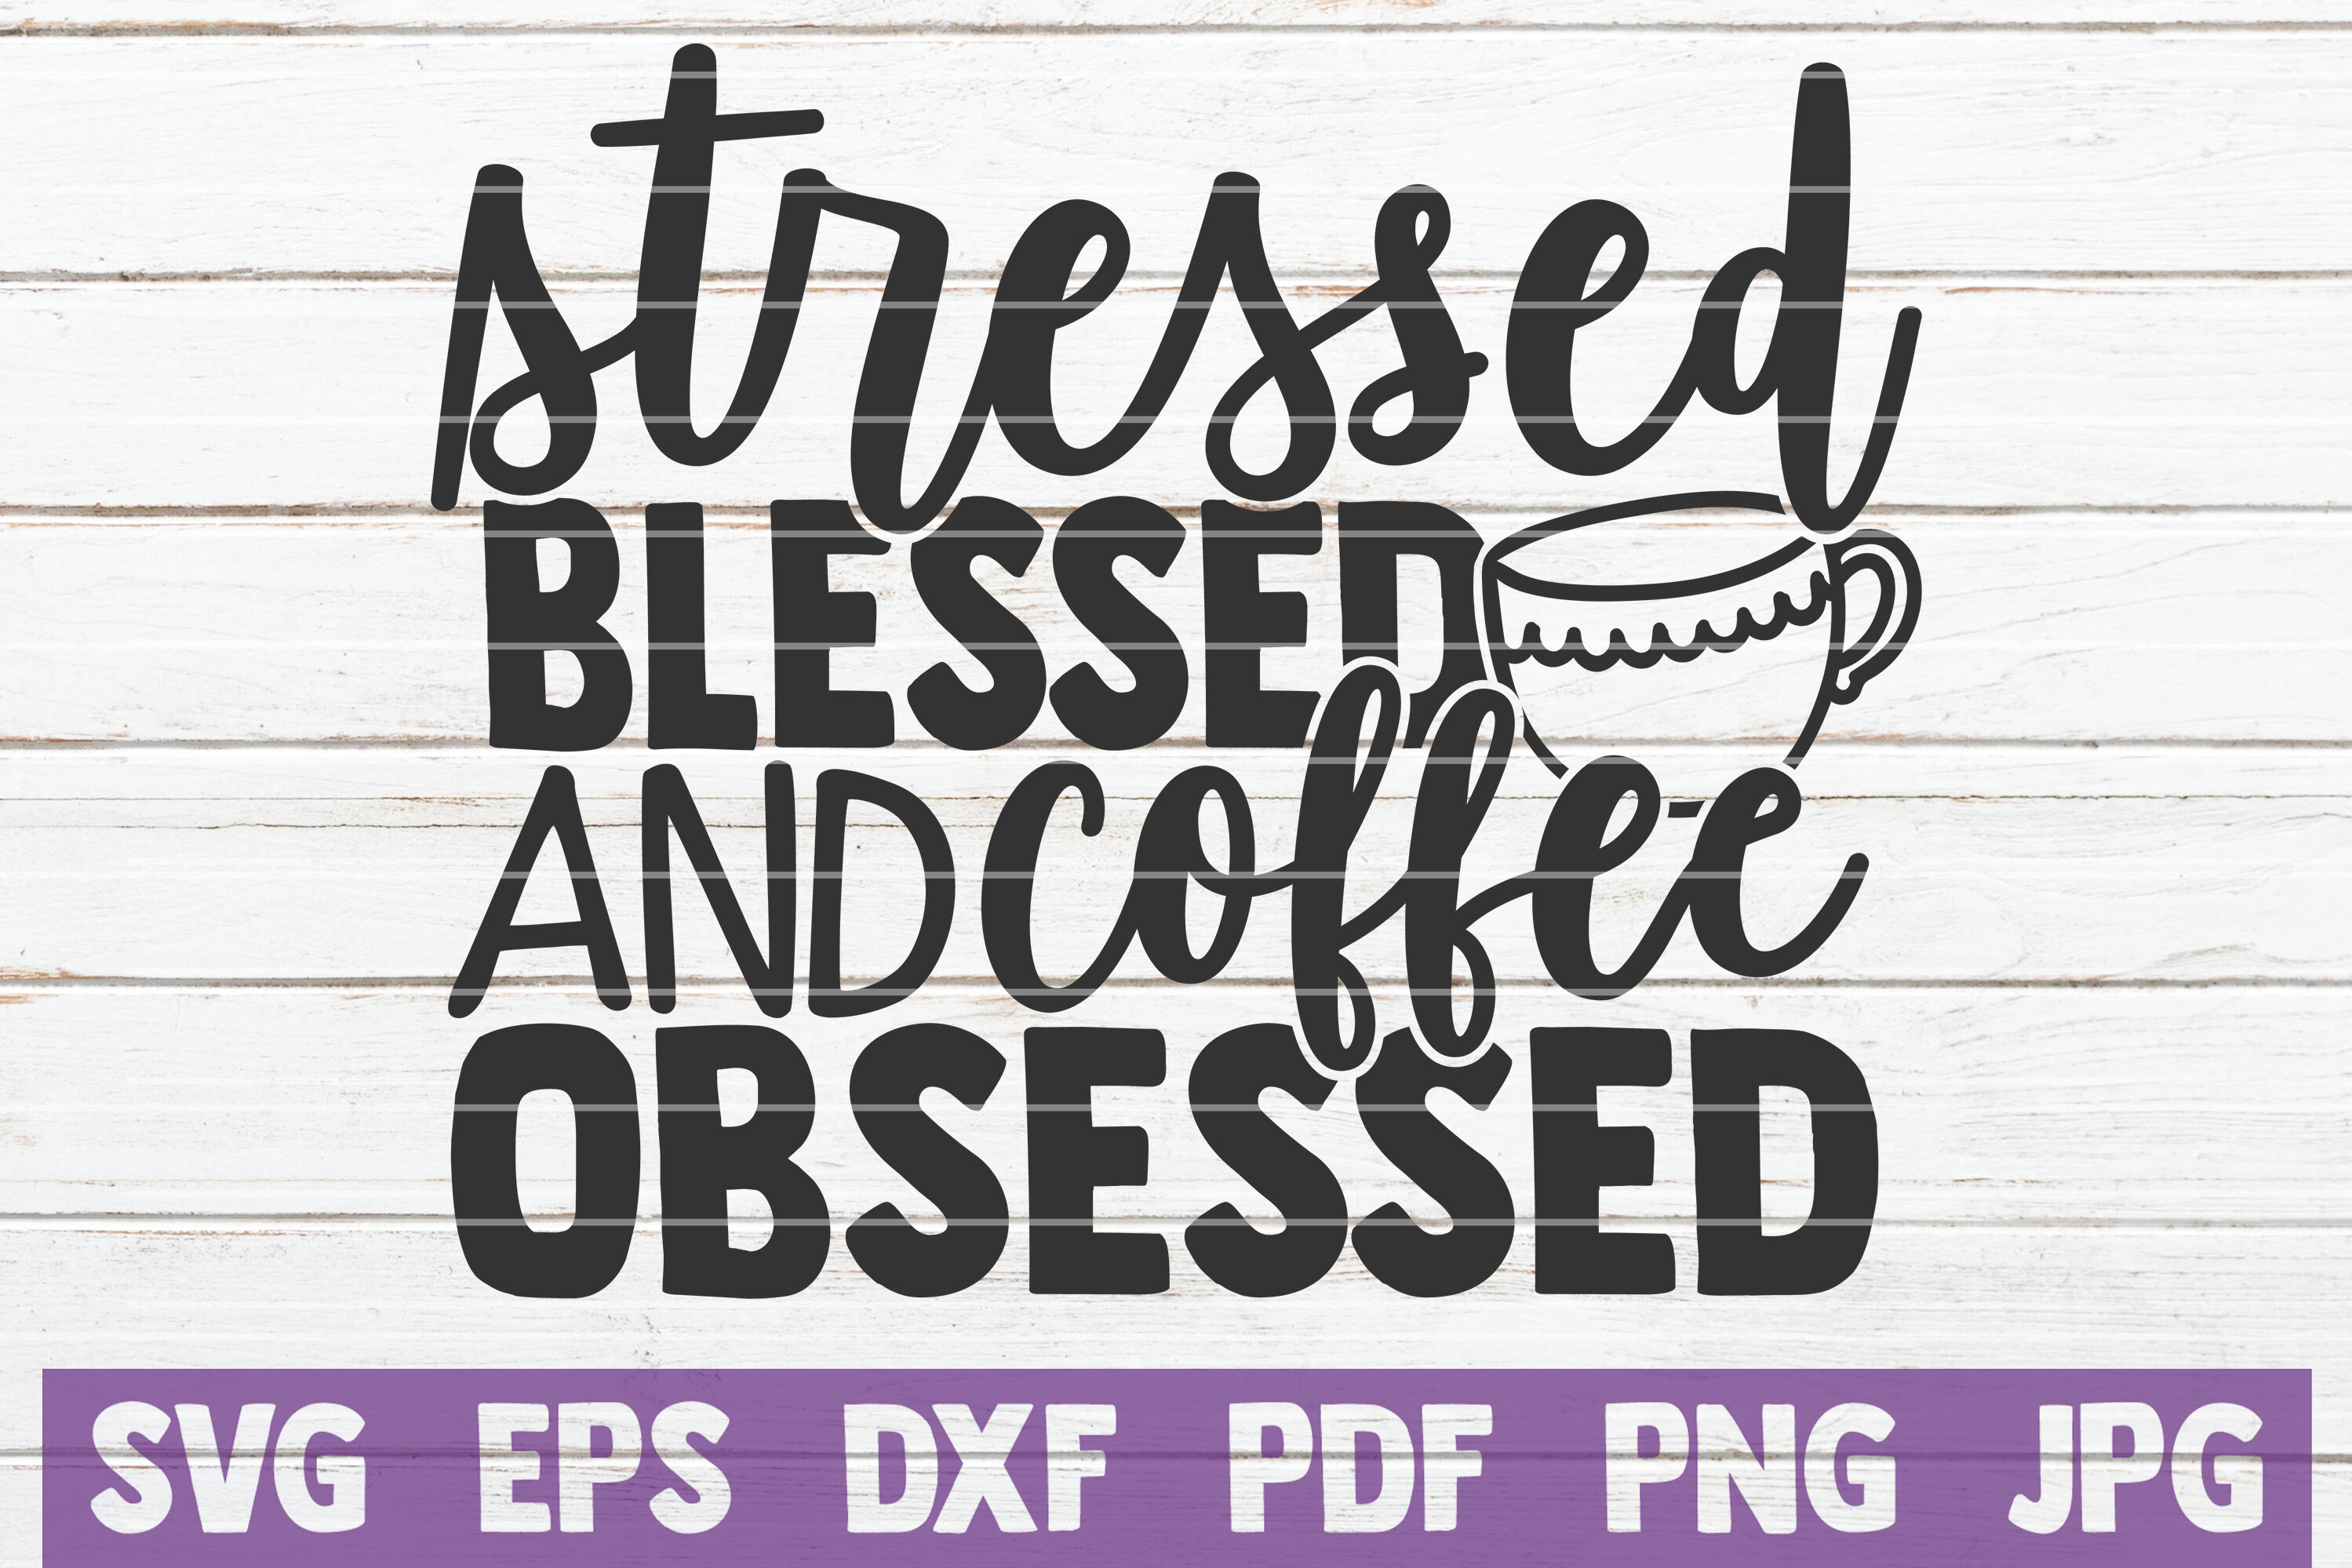 Stressed Blessed And Coffee Obsessed Svg Cut File By Mintymarshmallows Thehungryjpeg Com